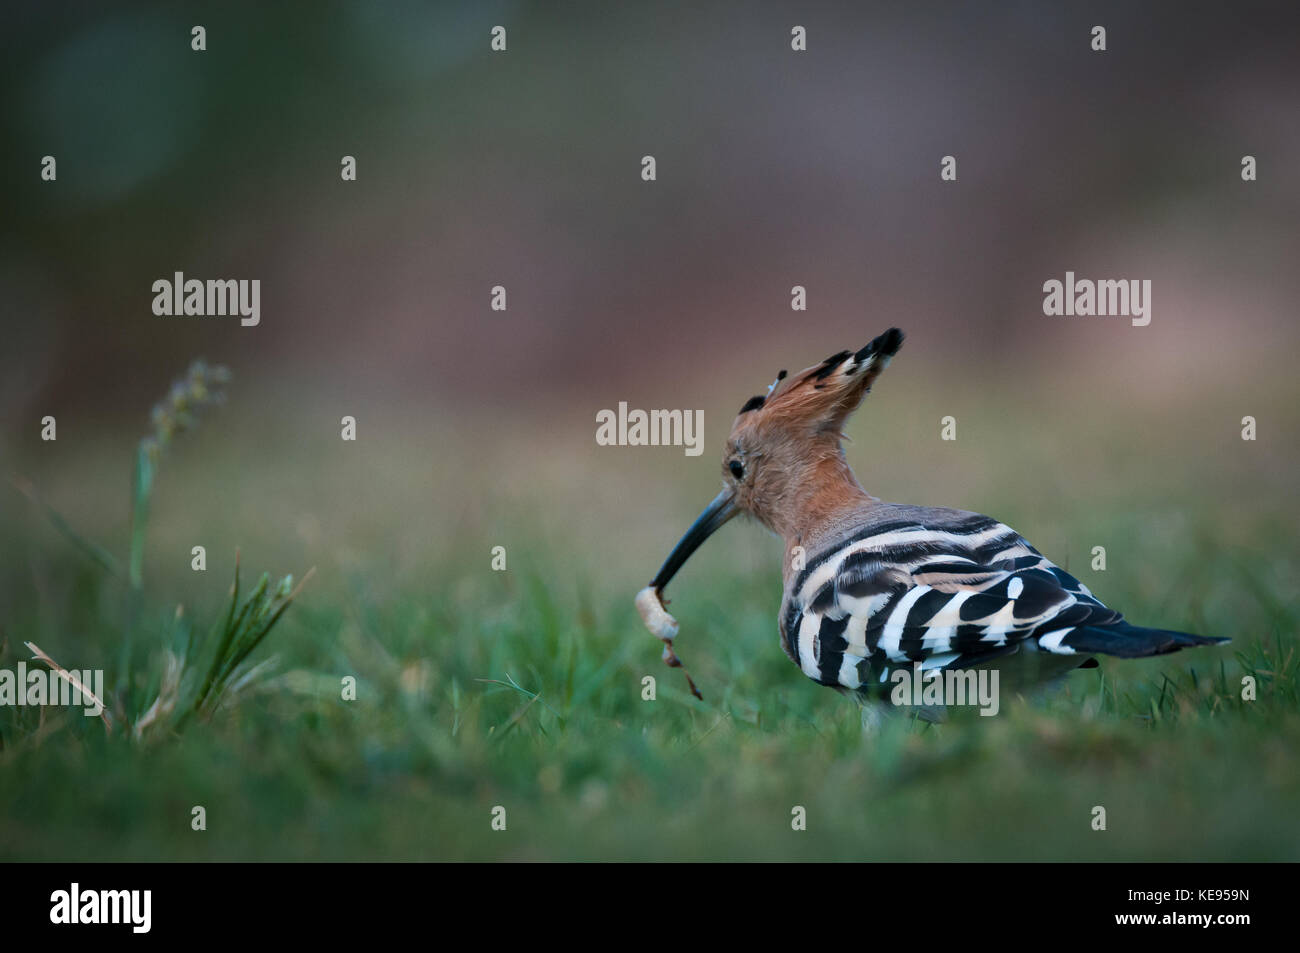 Hoopoe bird searching for worms in the fresh grass Stock Photo